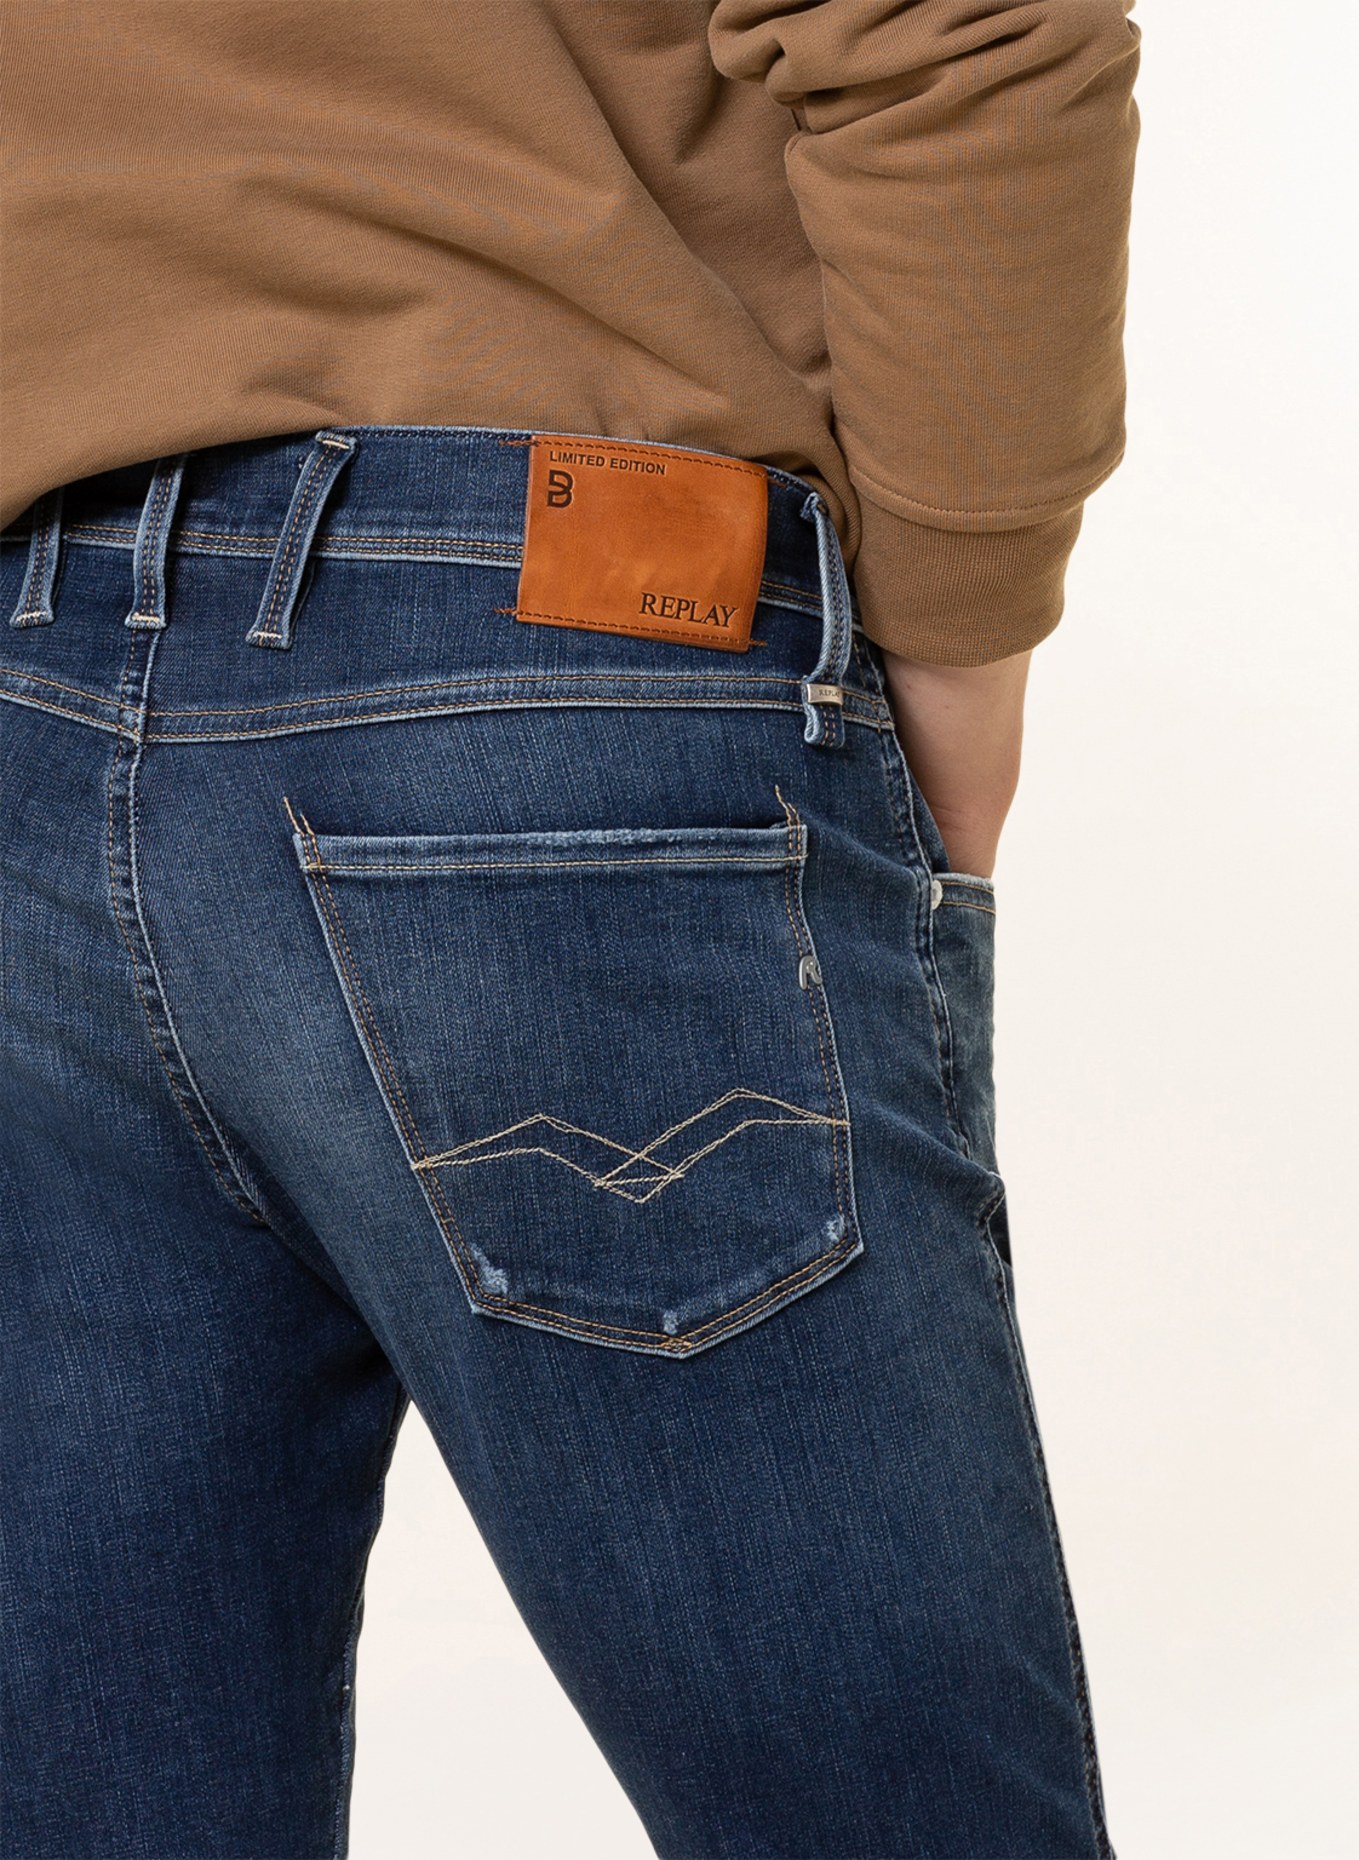 REPLAY Jeans RE-USED, Farbe: 007 007 (Bild 5)